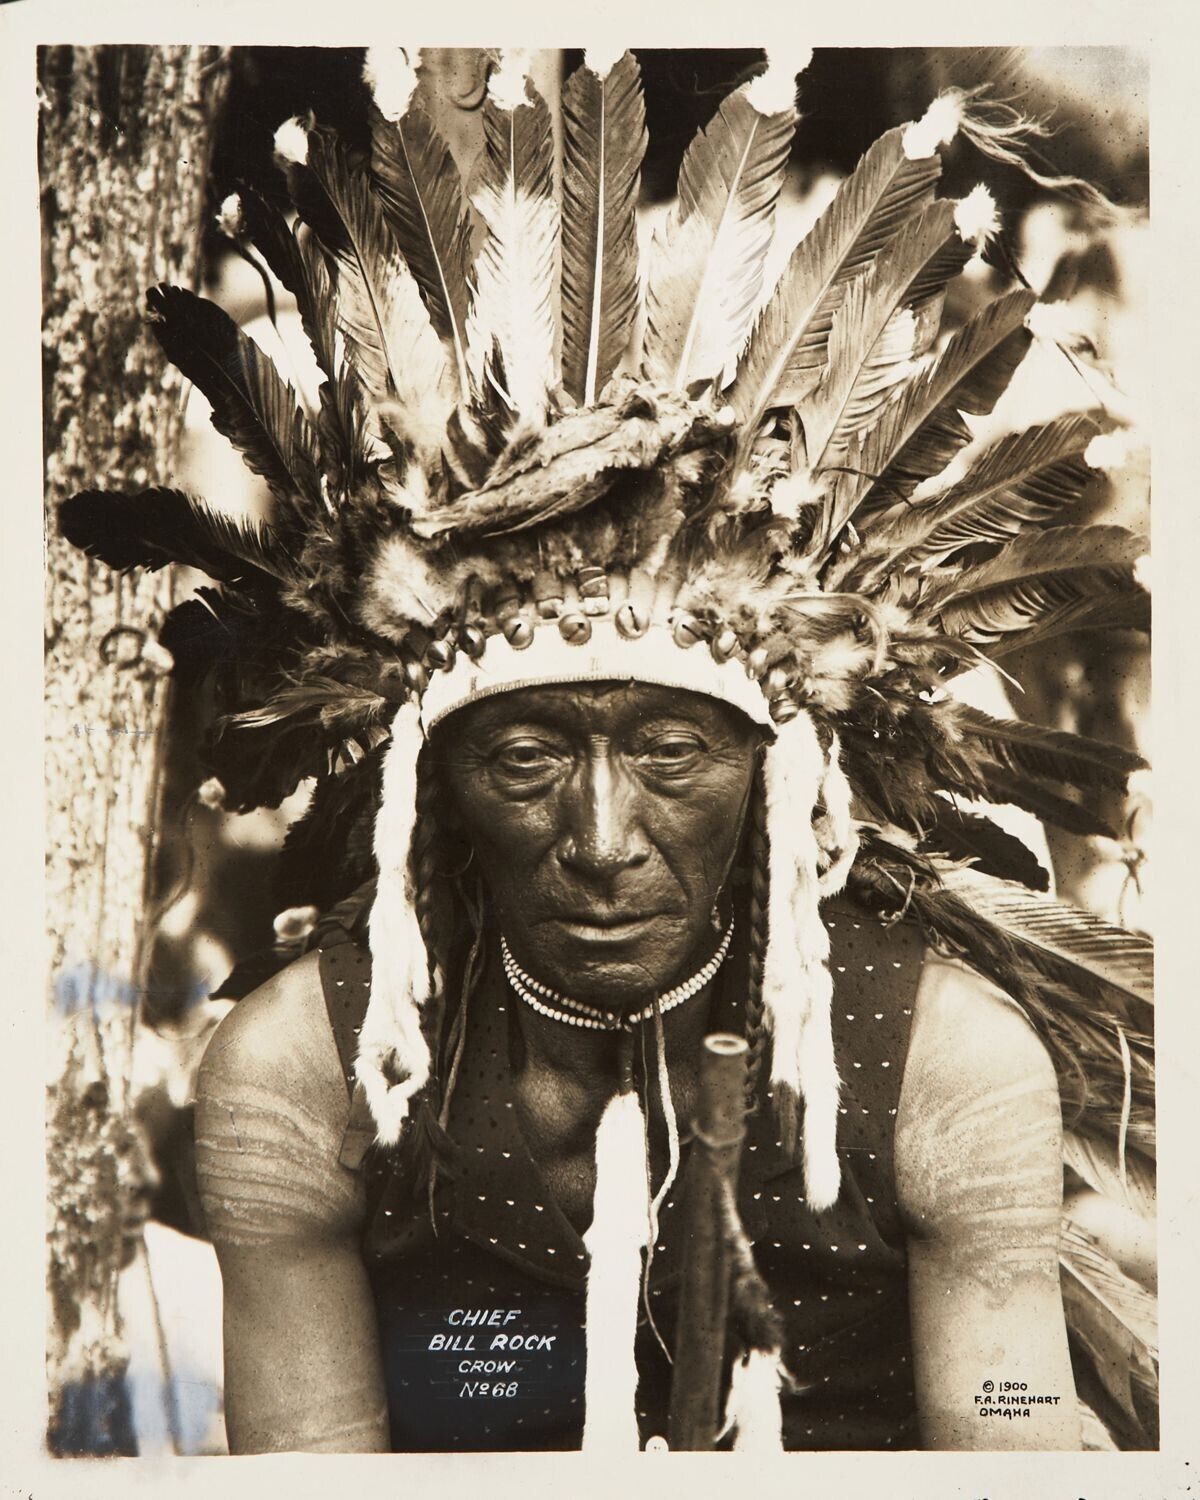 Crow Chief Bull Rock Native American Indian 8 x 10 Photo Vintage